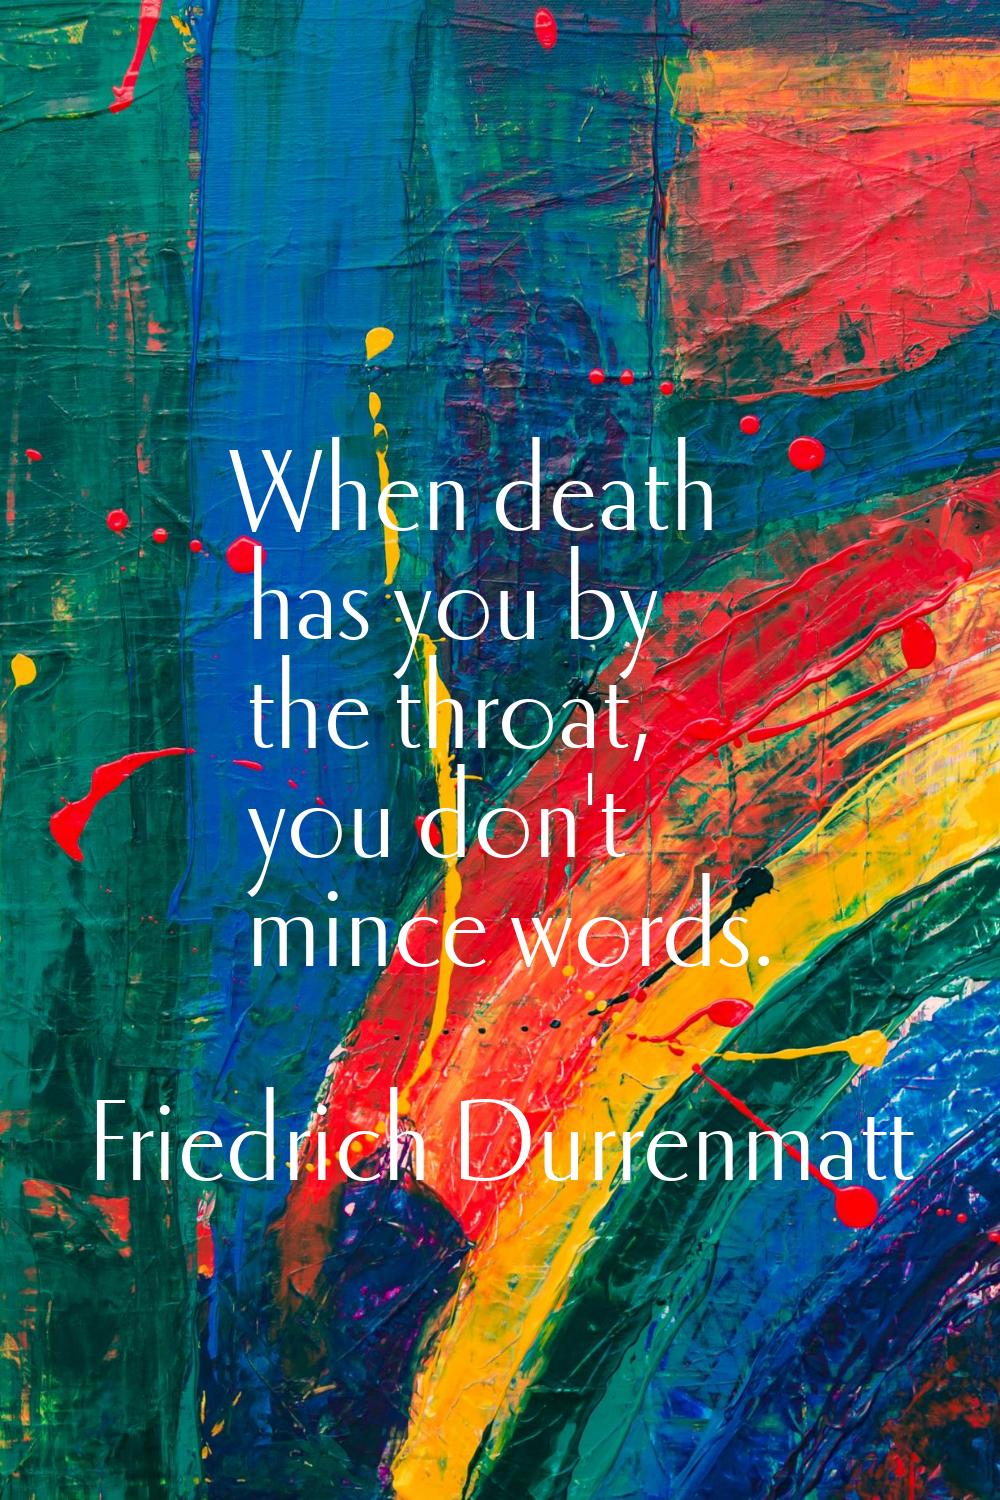 When death has you by the throat, you don't mince words.